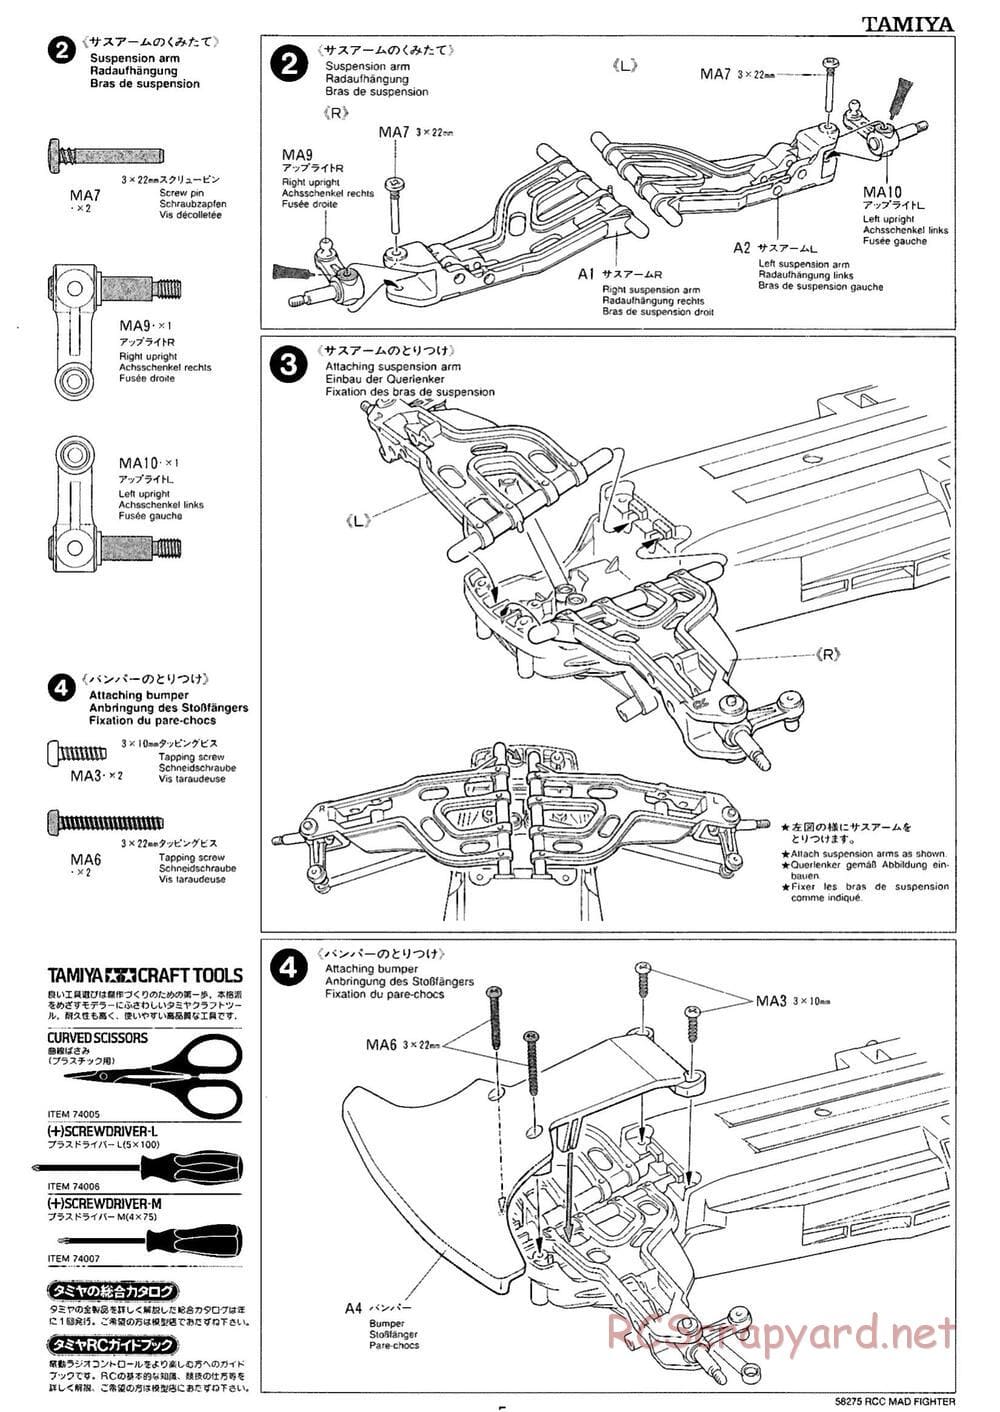 Tamiya - Mad Fighter Chassis - Manual - Page 5